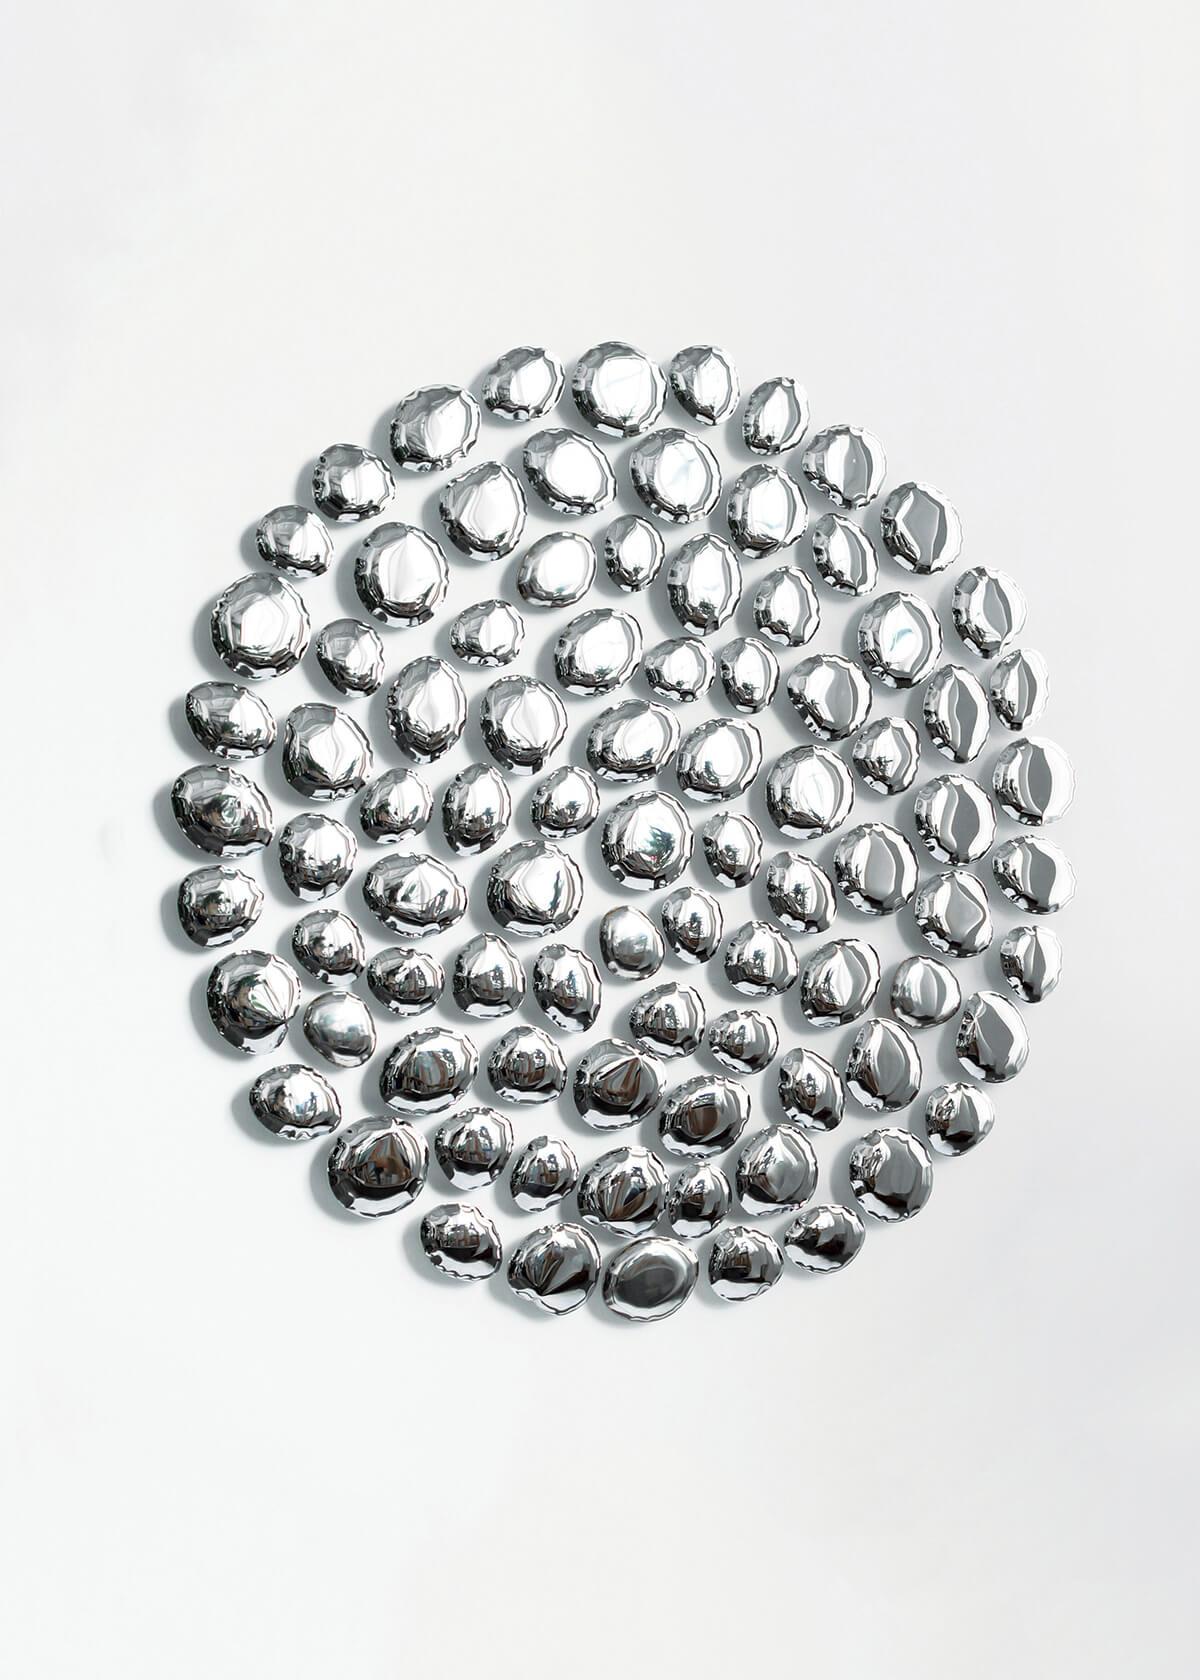 Mercury 'Transitions' by Zieta, Mounted Sculpture in Stainless Steel For Sale 5